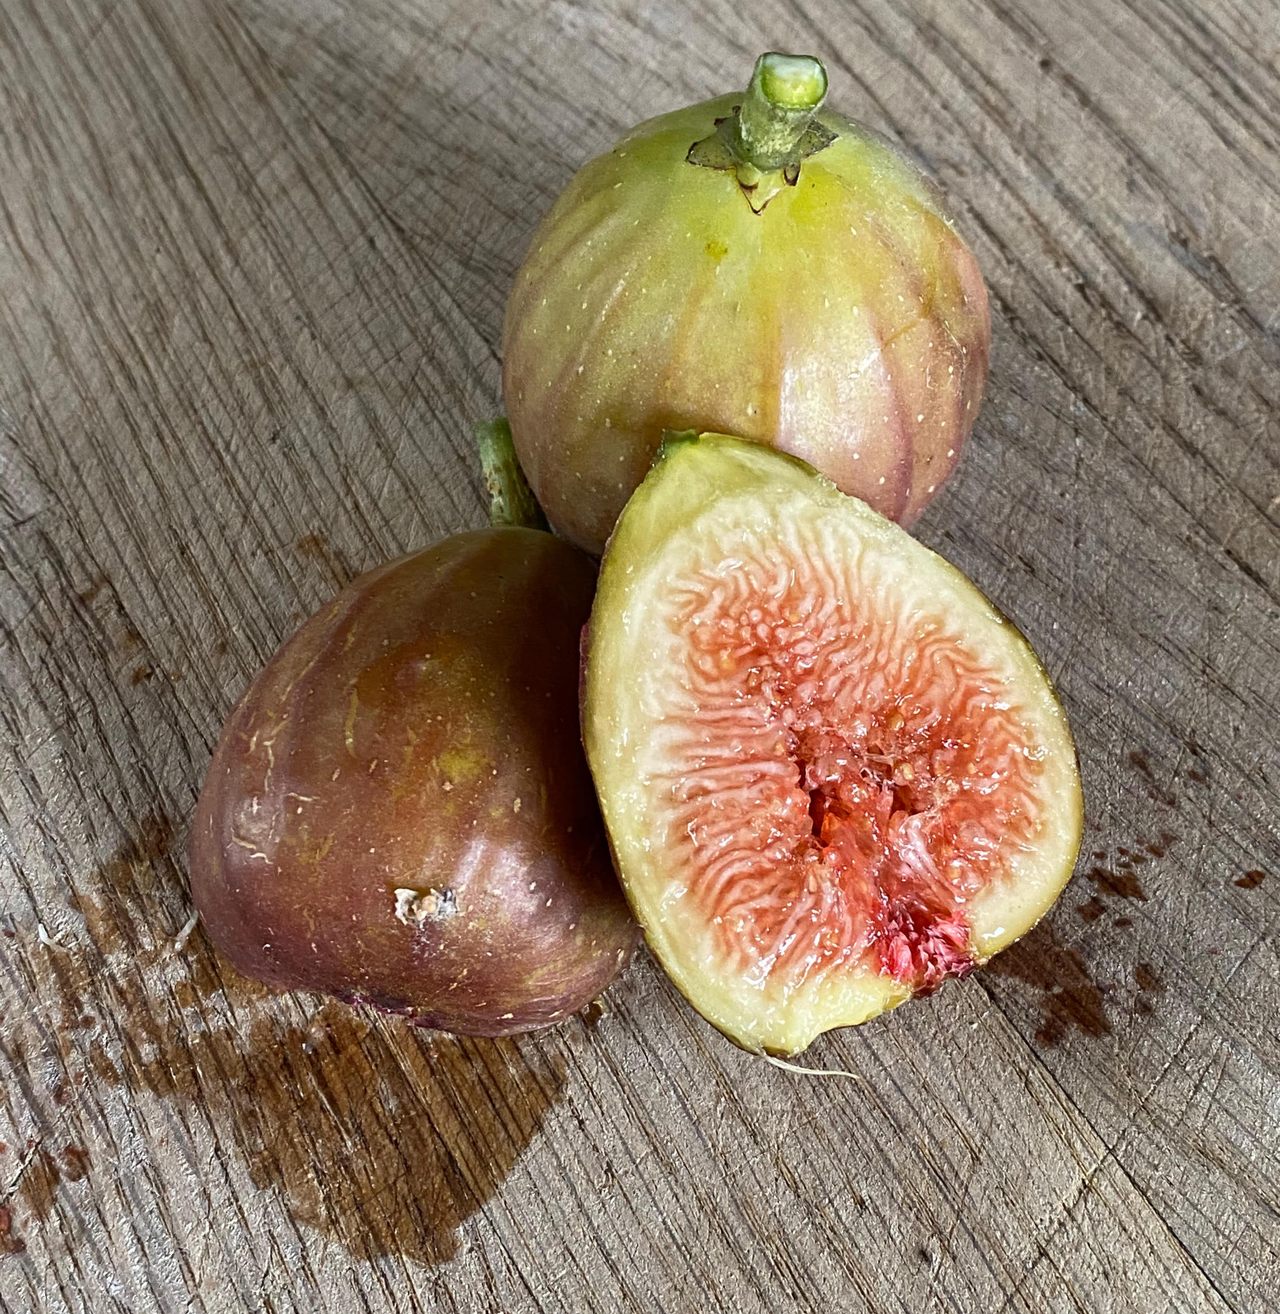 The Higby variety of the Hog Island Fig.